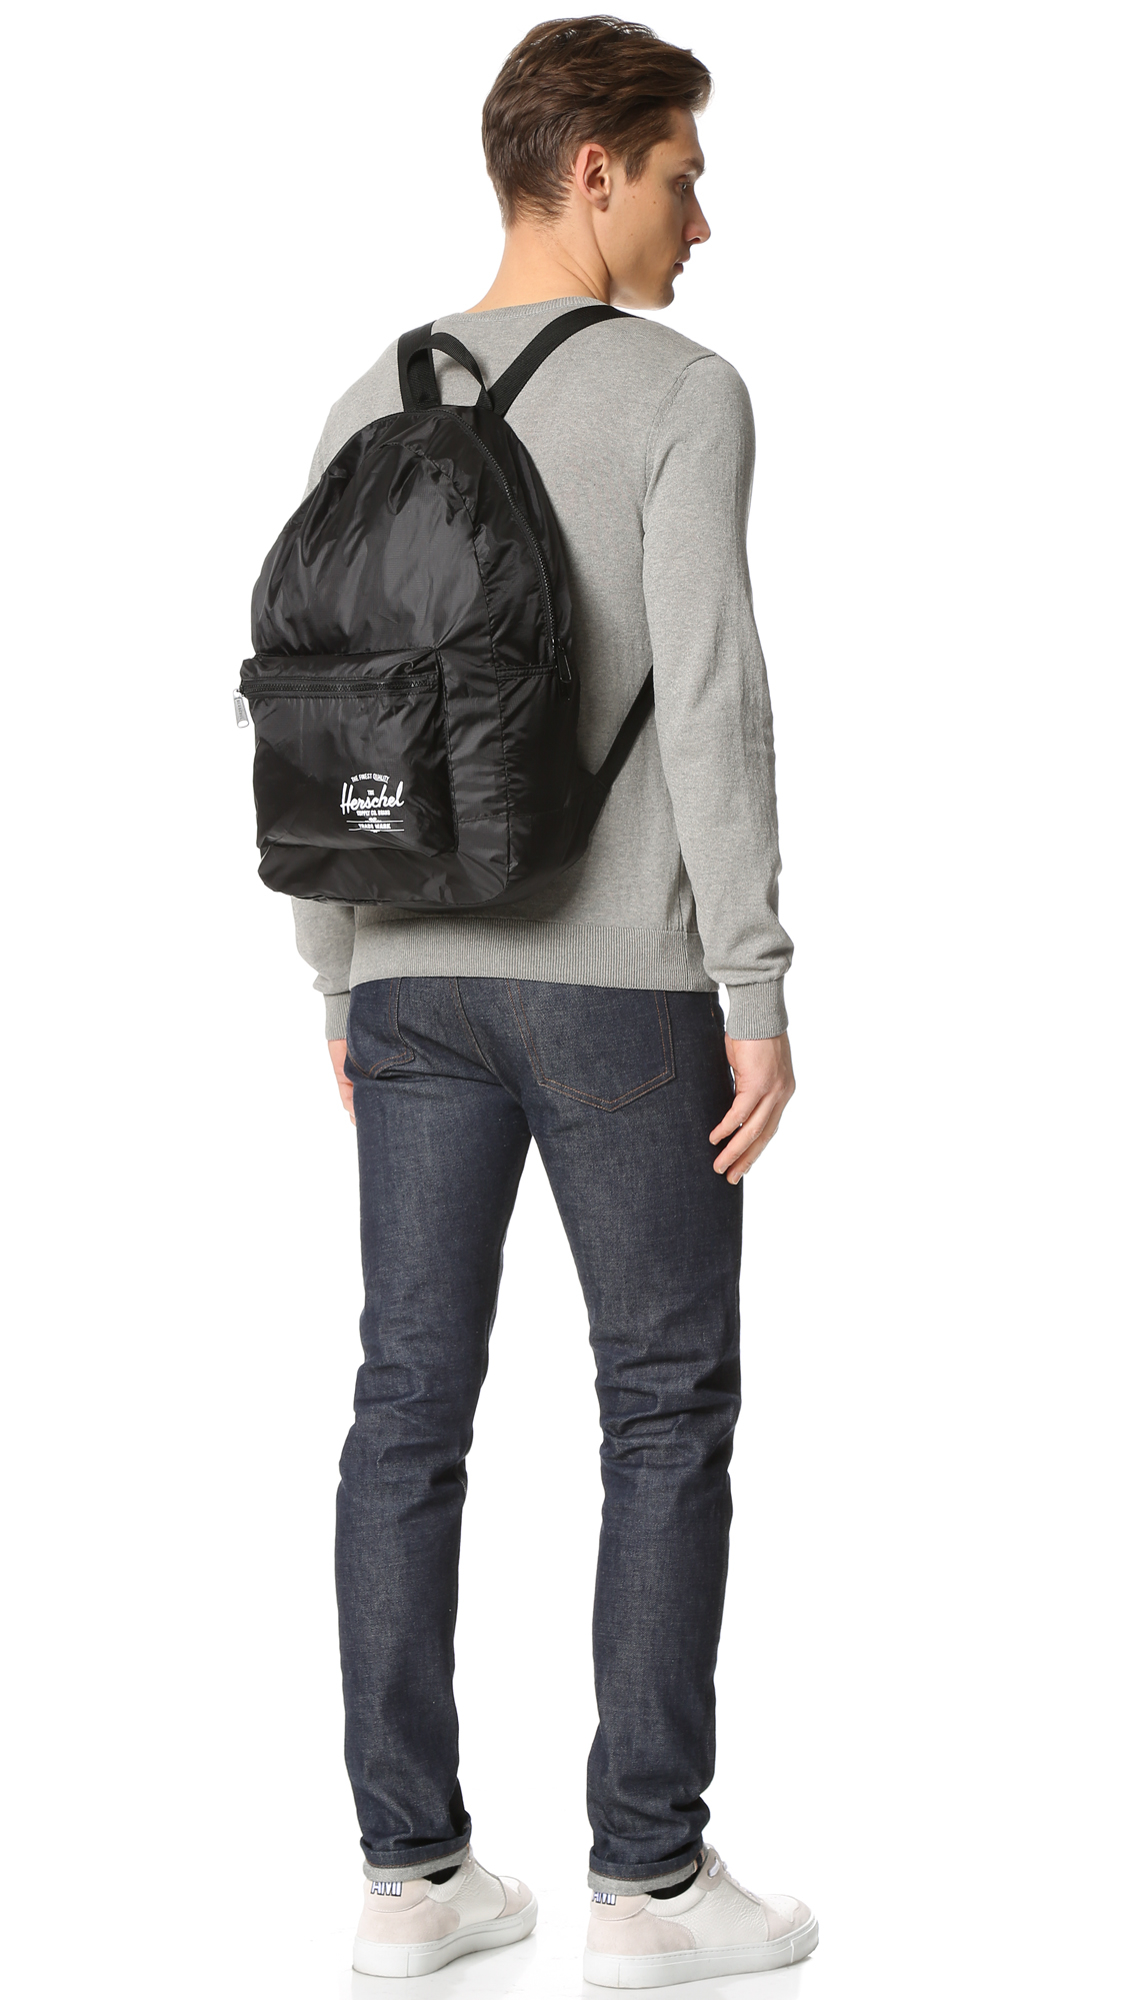 Accessories Packable Daypack Casual Daypack Herschel Supply Co Multipurpose  Daypacks Accessories